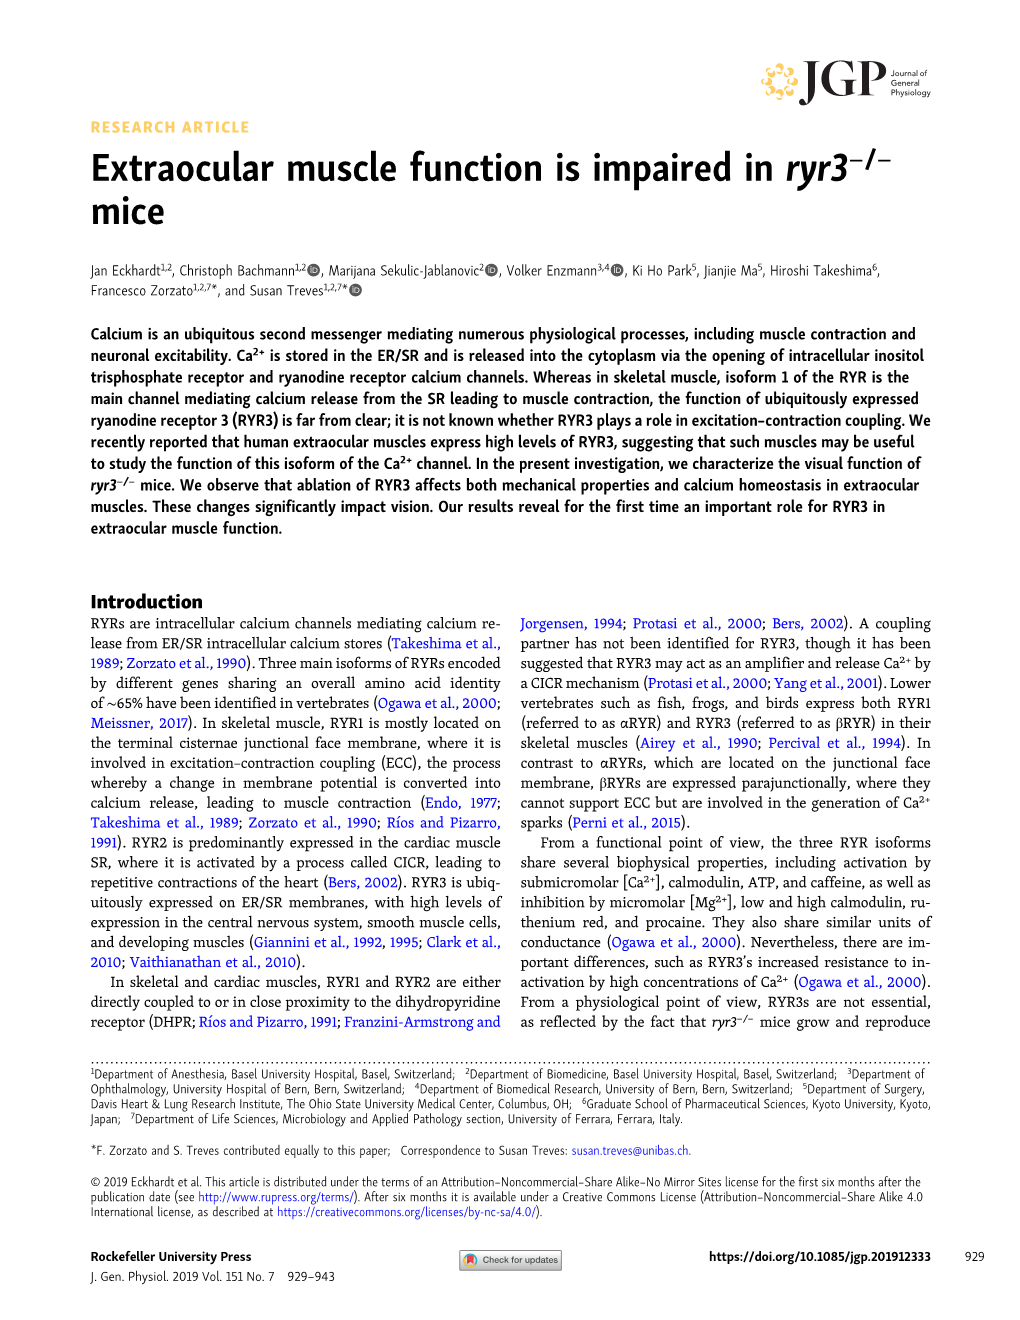 Extraocular Muscle Function Is Impaired in Ryr3−/− Mice